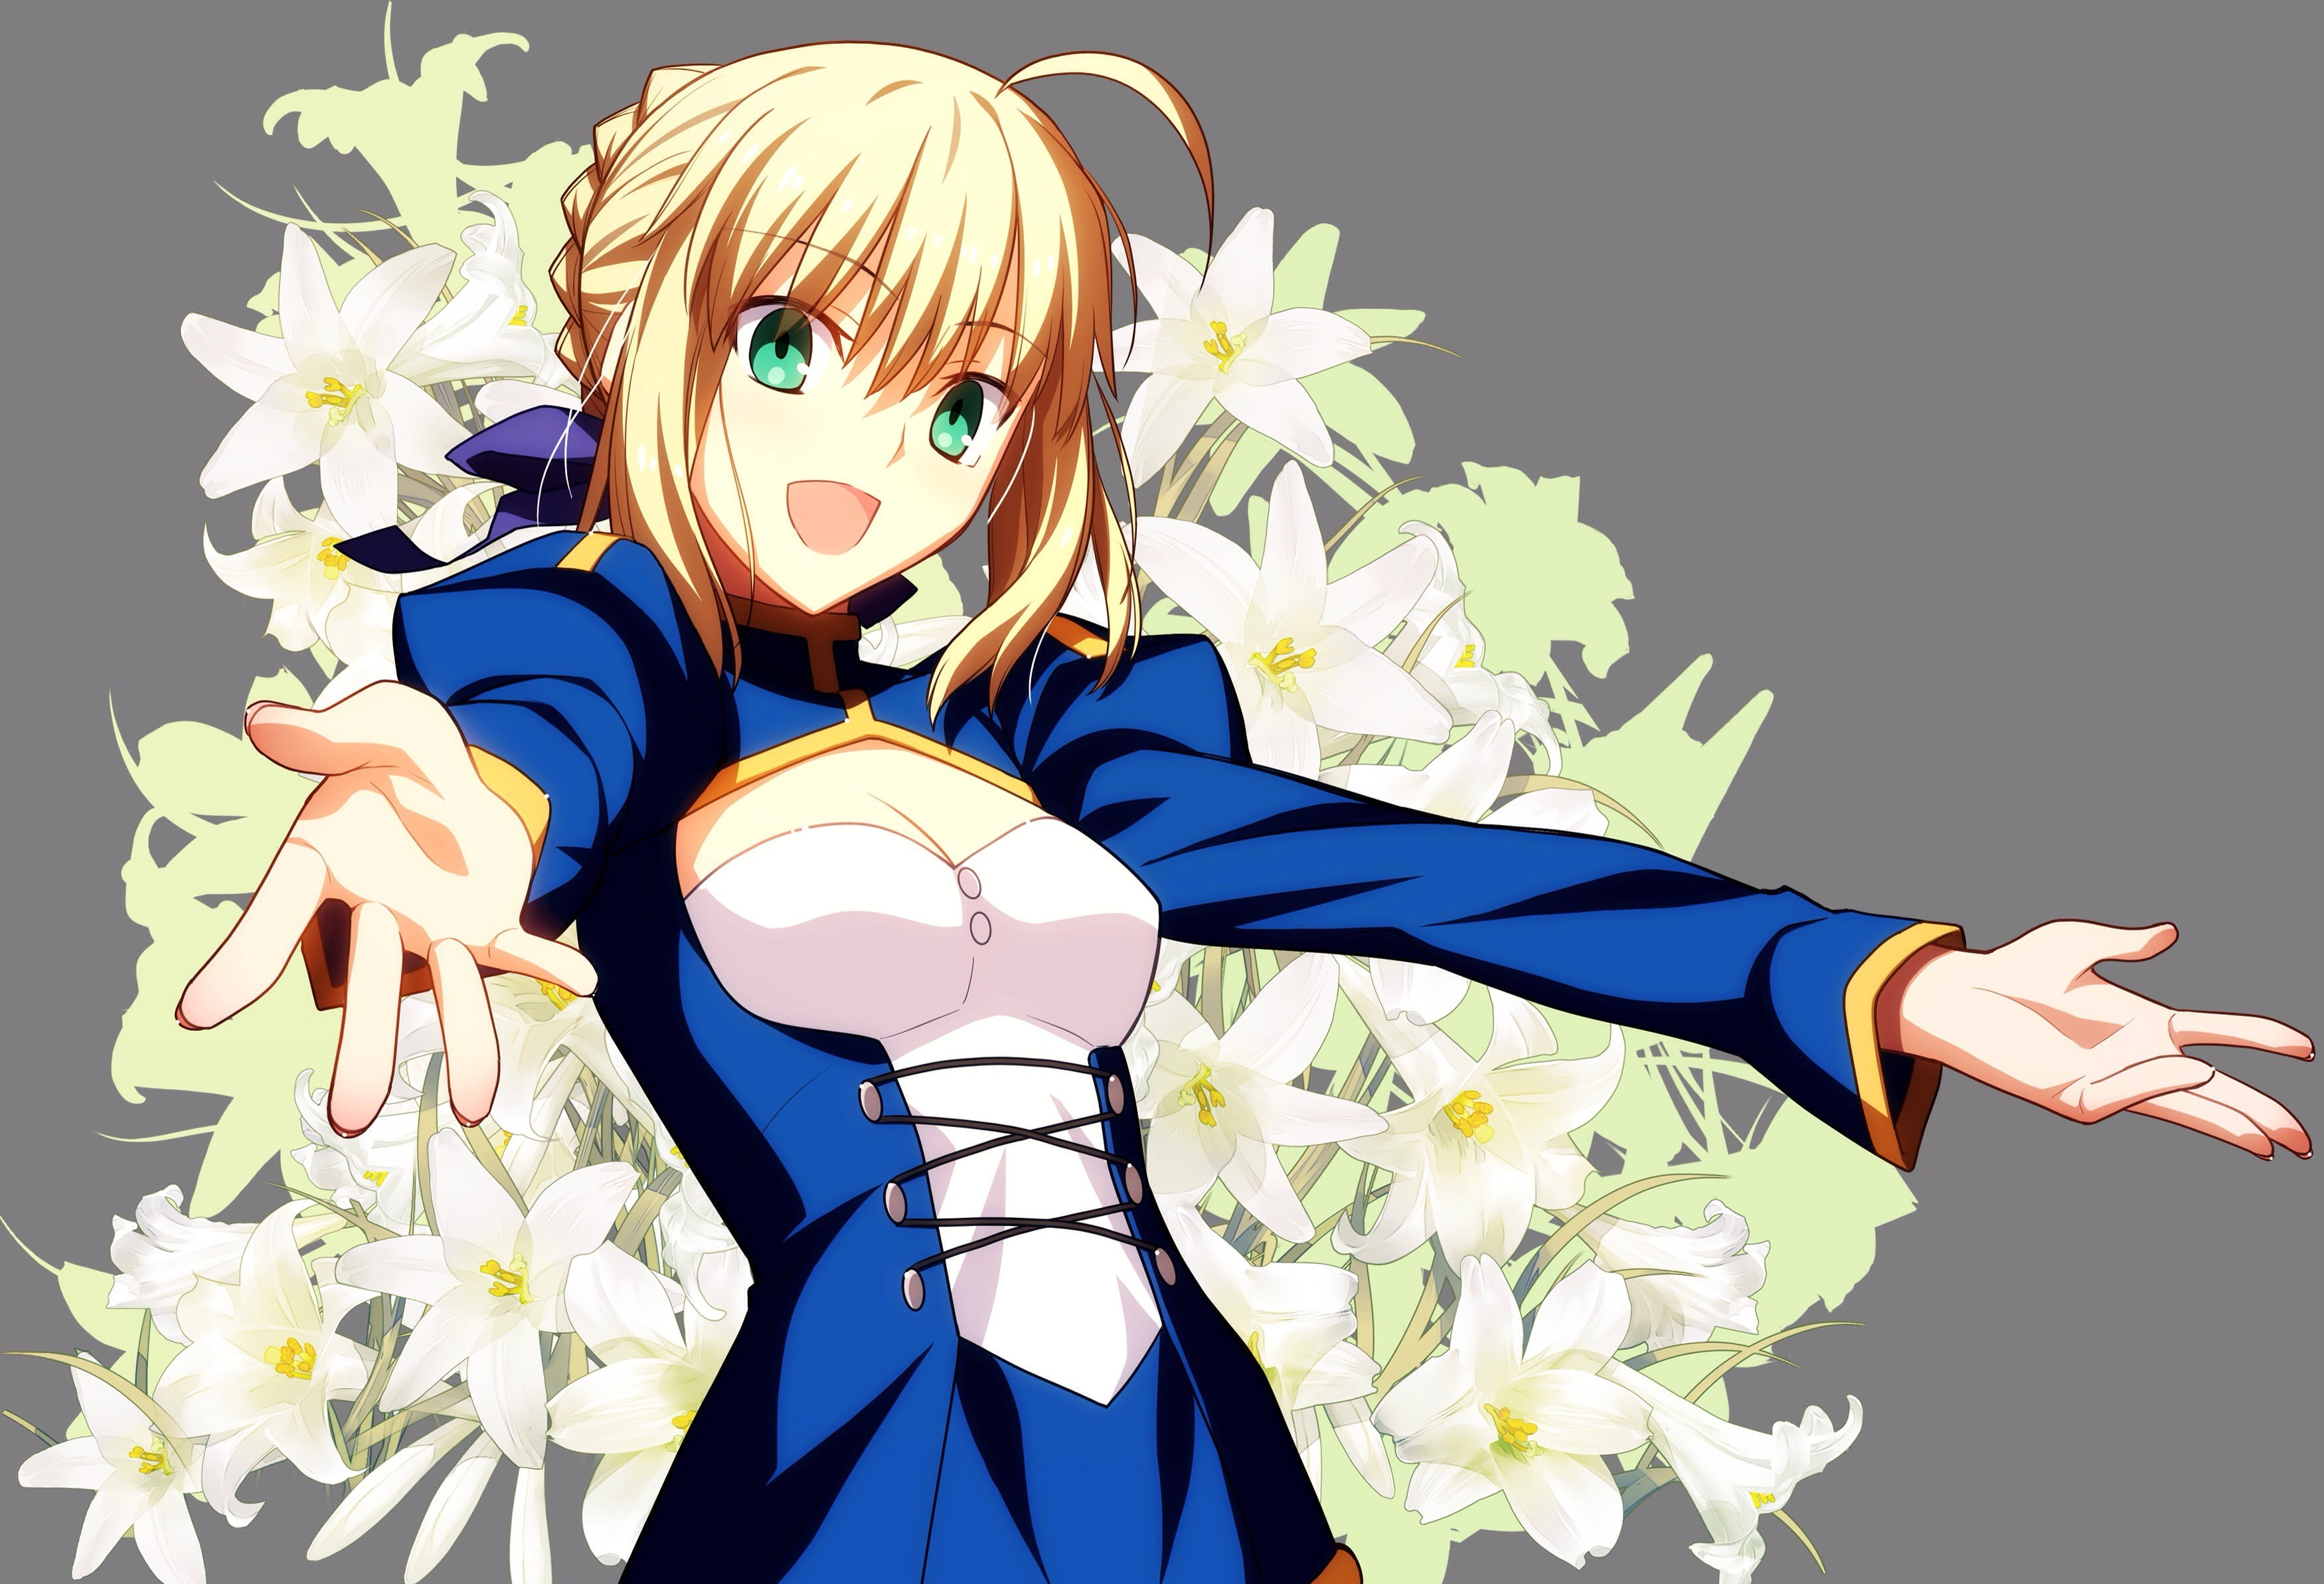 1. Saber from Fate/stay night - wide 3